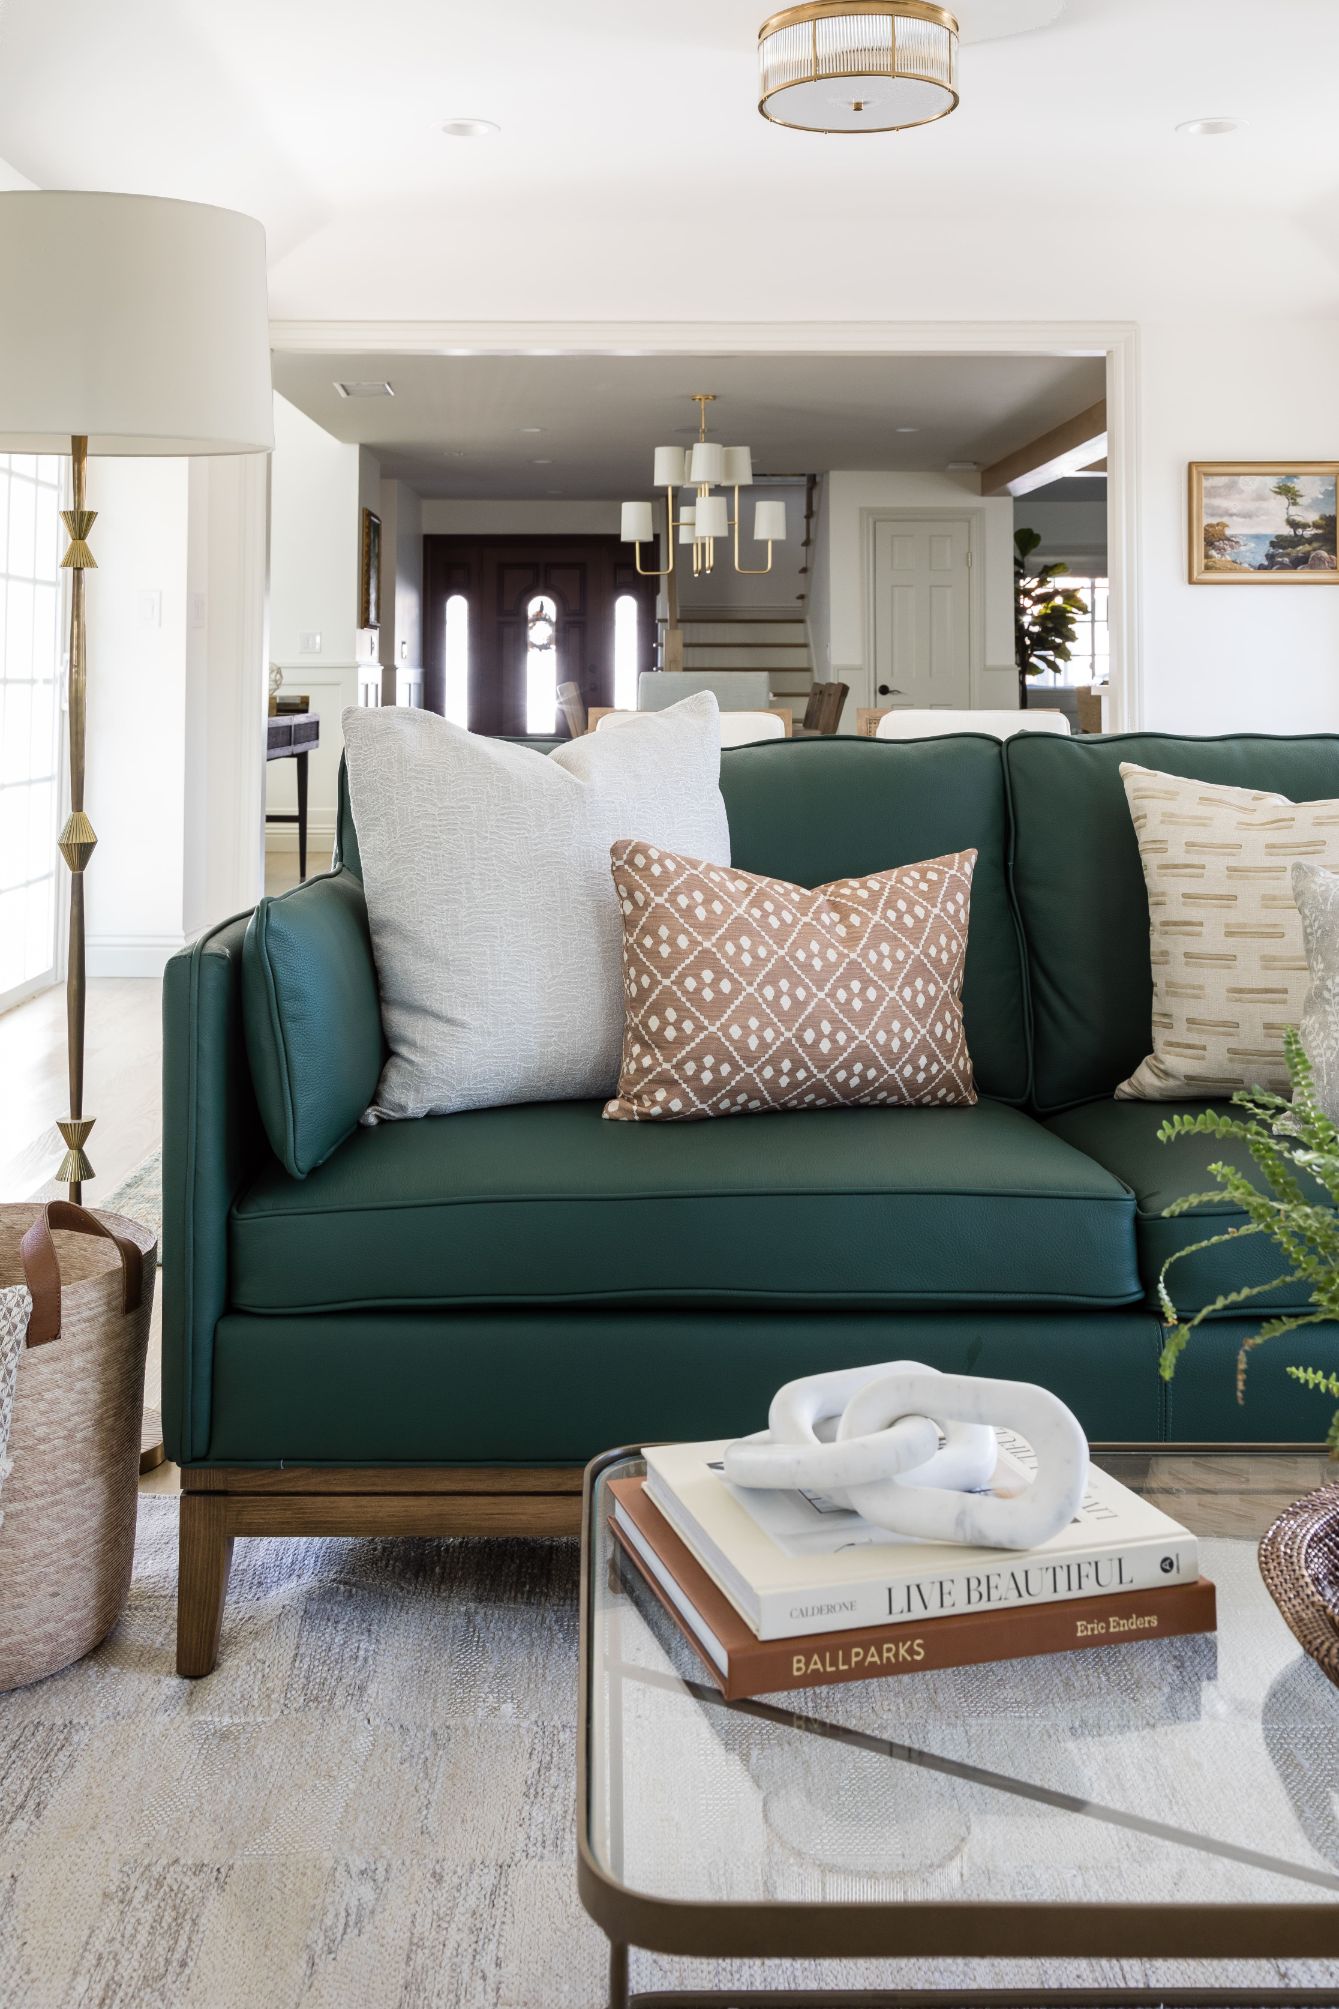 interior design detail of couch with pillows